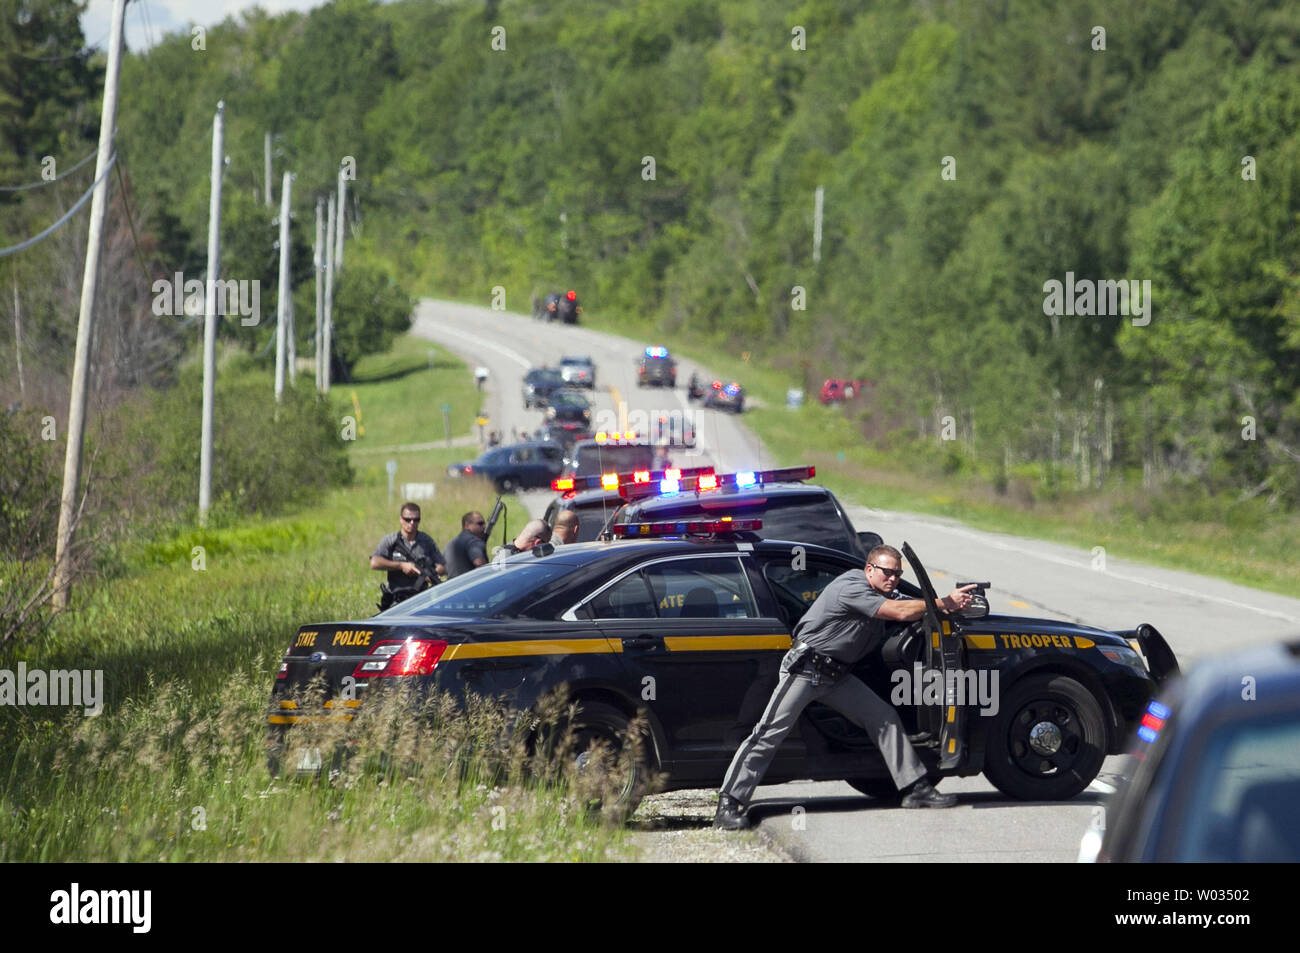 Law enforcement personnel take cover after cornering two escaped prisoners off of Route 30 in Malone, New York on June 26, 2015.  At least one prisoner, Richard Matt, is believed to have been shot dead by law enforcement and second prisoner, David Sweat, may still be on the loose. Photo by Matthew Healey/UPI Stock Photo